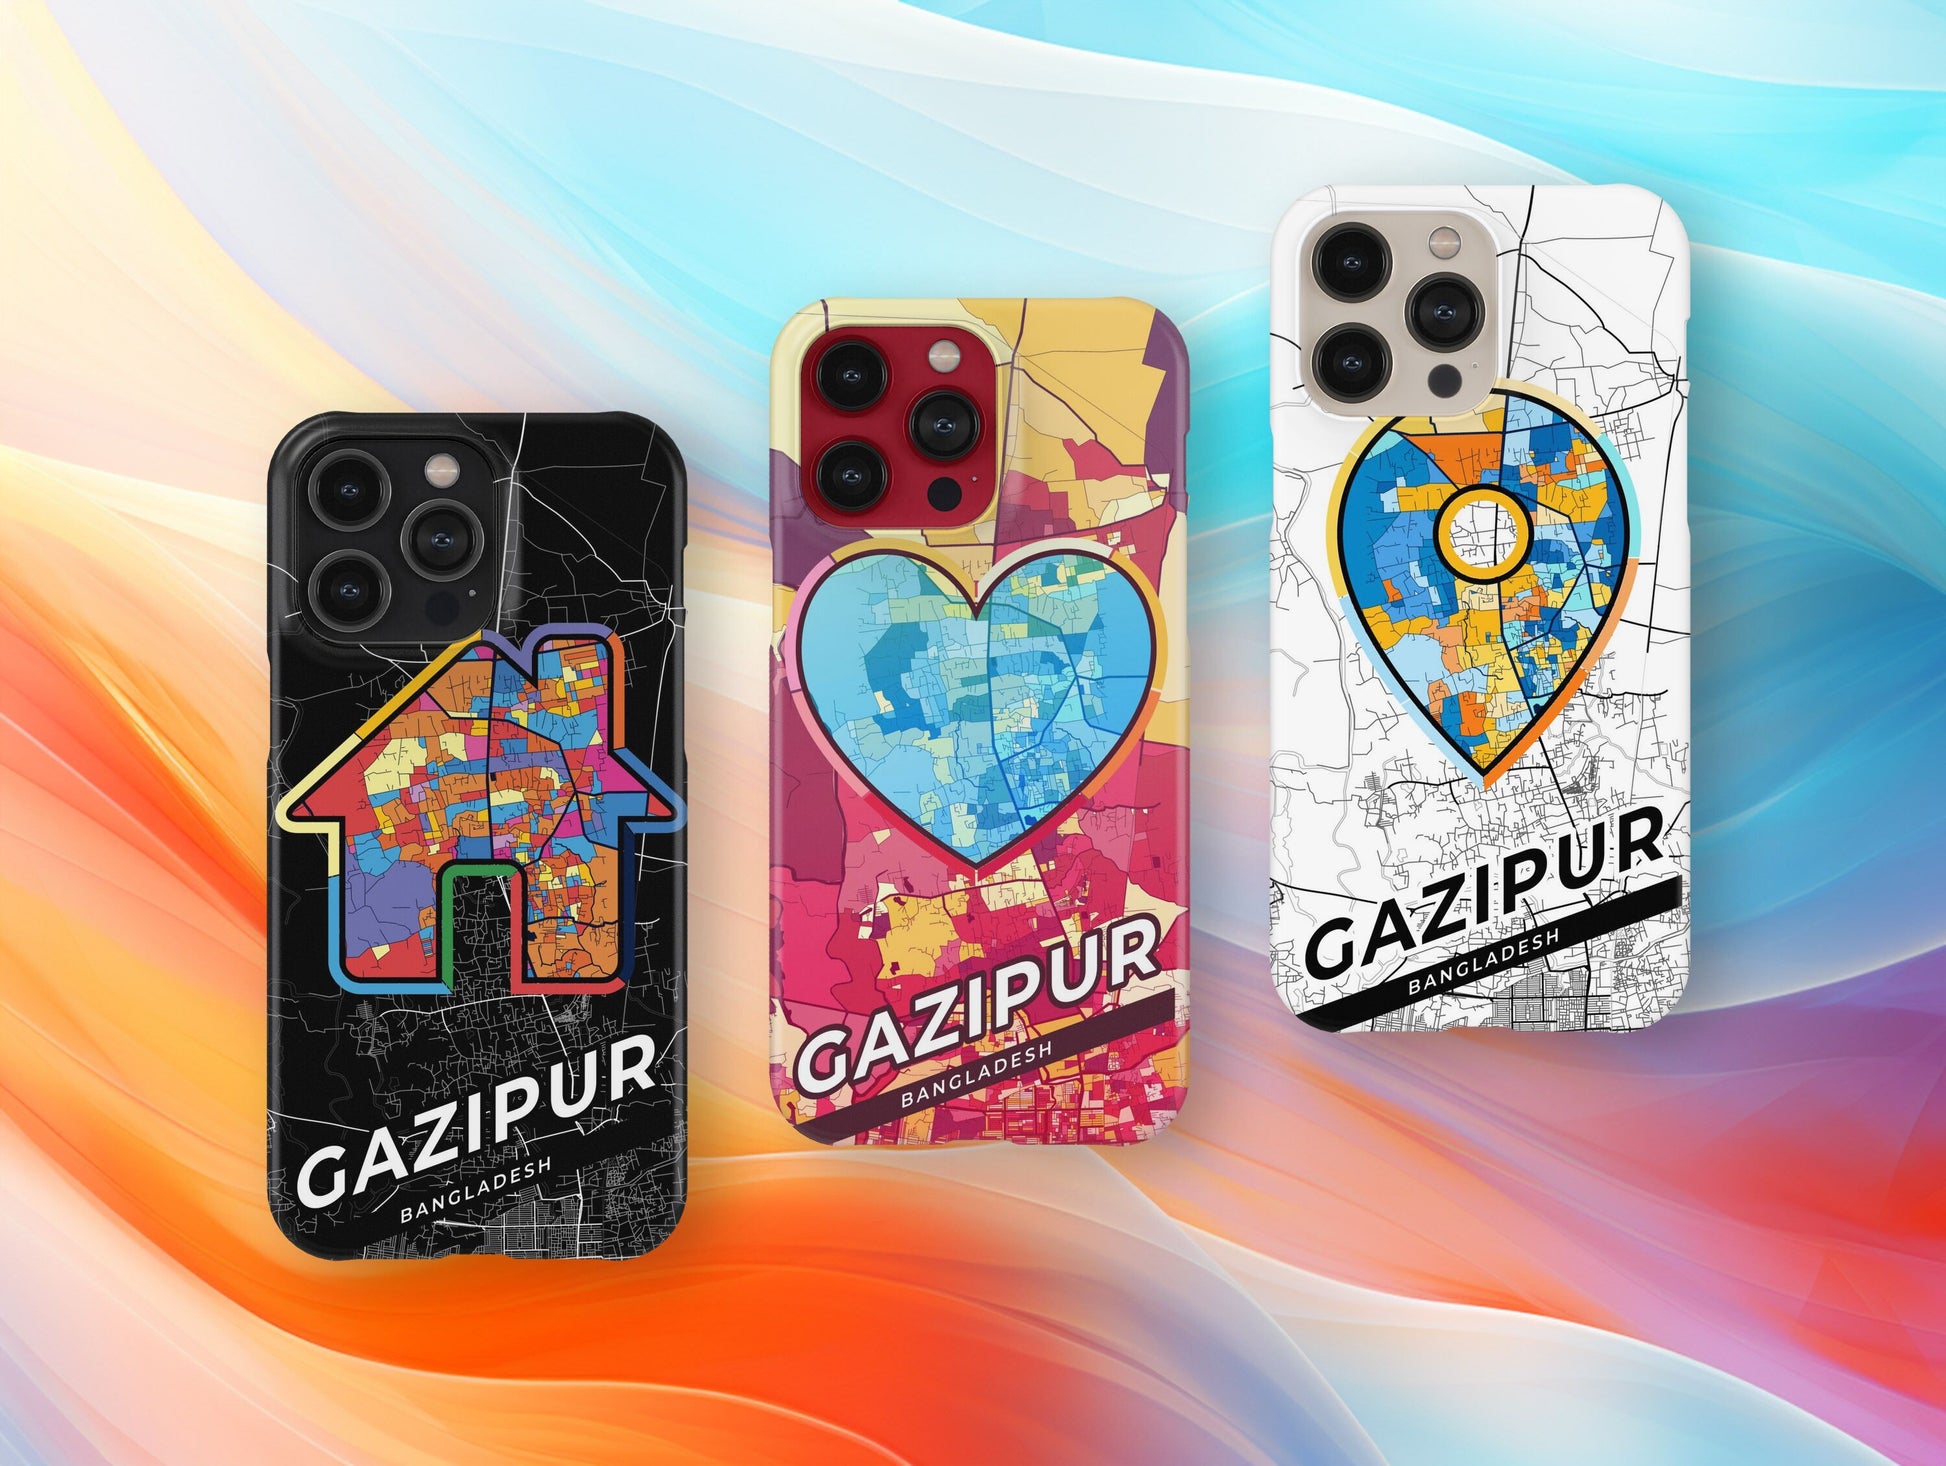 Gazipur Bangladesh slim phone case with colorful icon. Birthday, wedding or housewarming gift. Couple match cases.